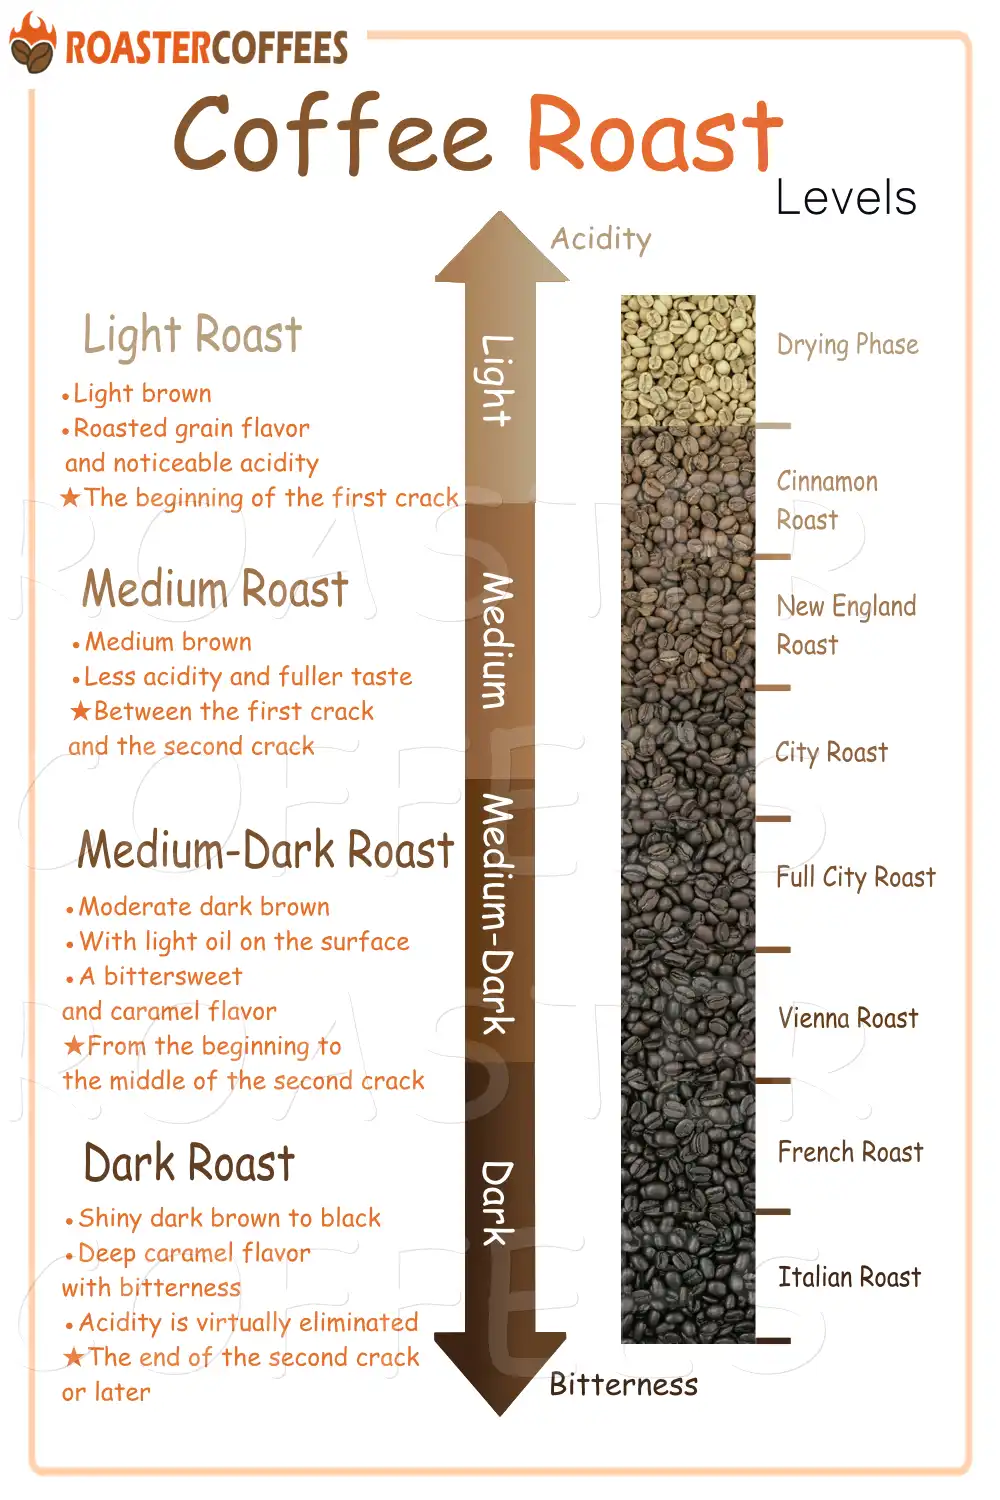 A coffee roast level chart, including the roasting stages and the levels